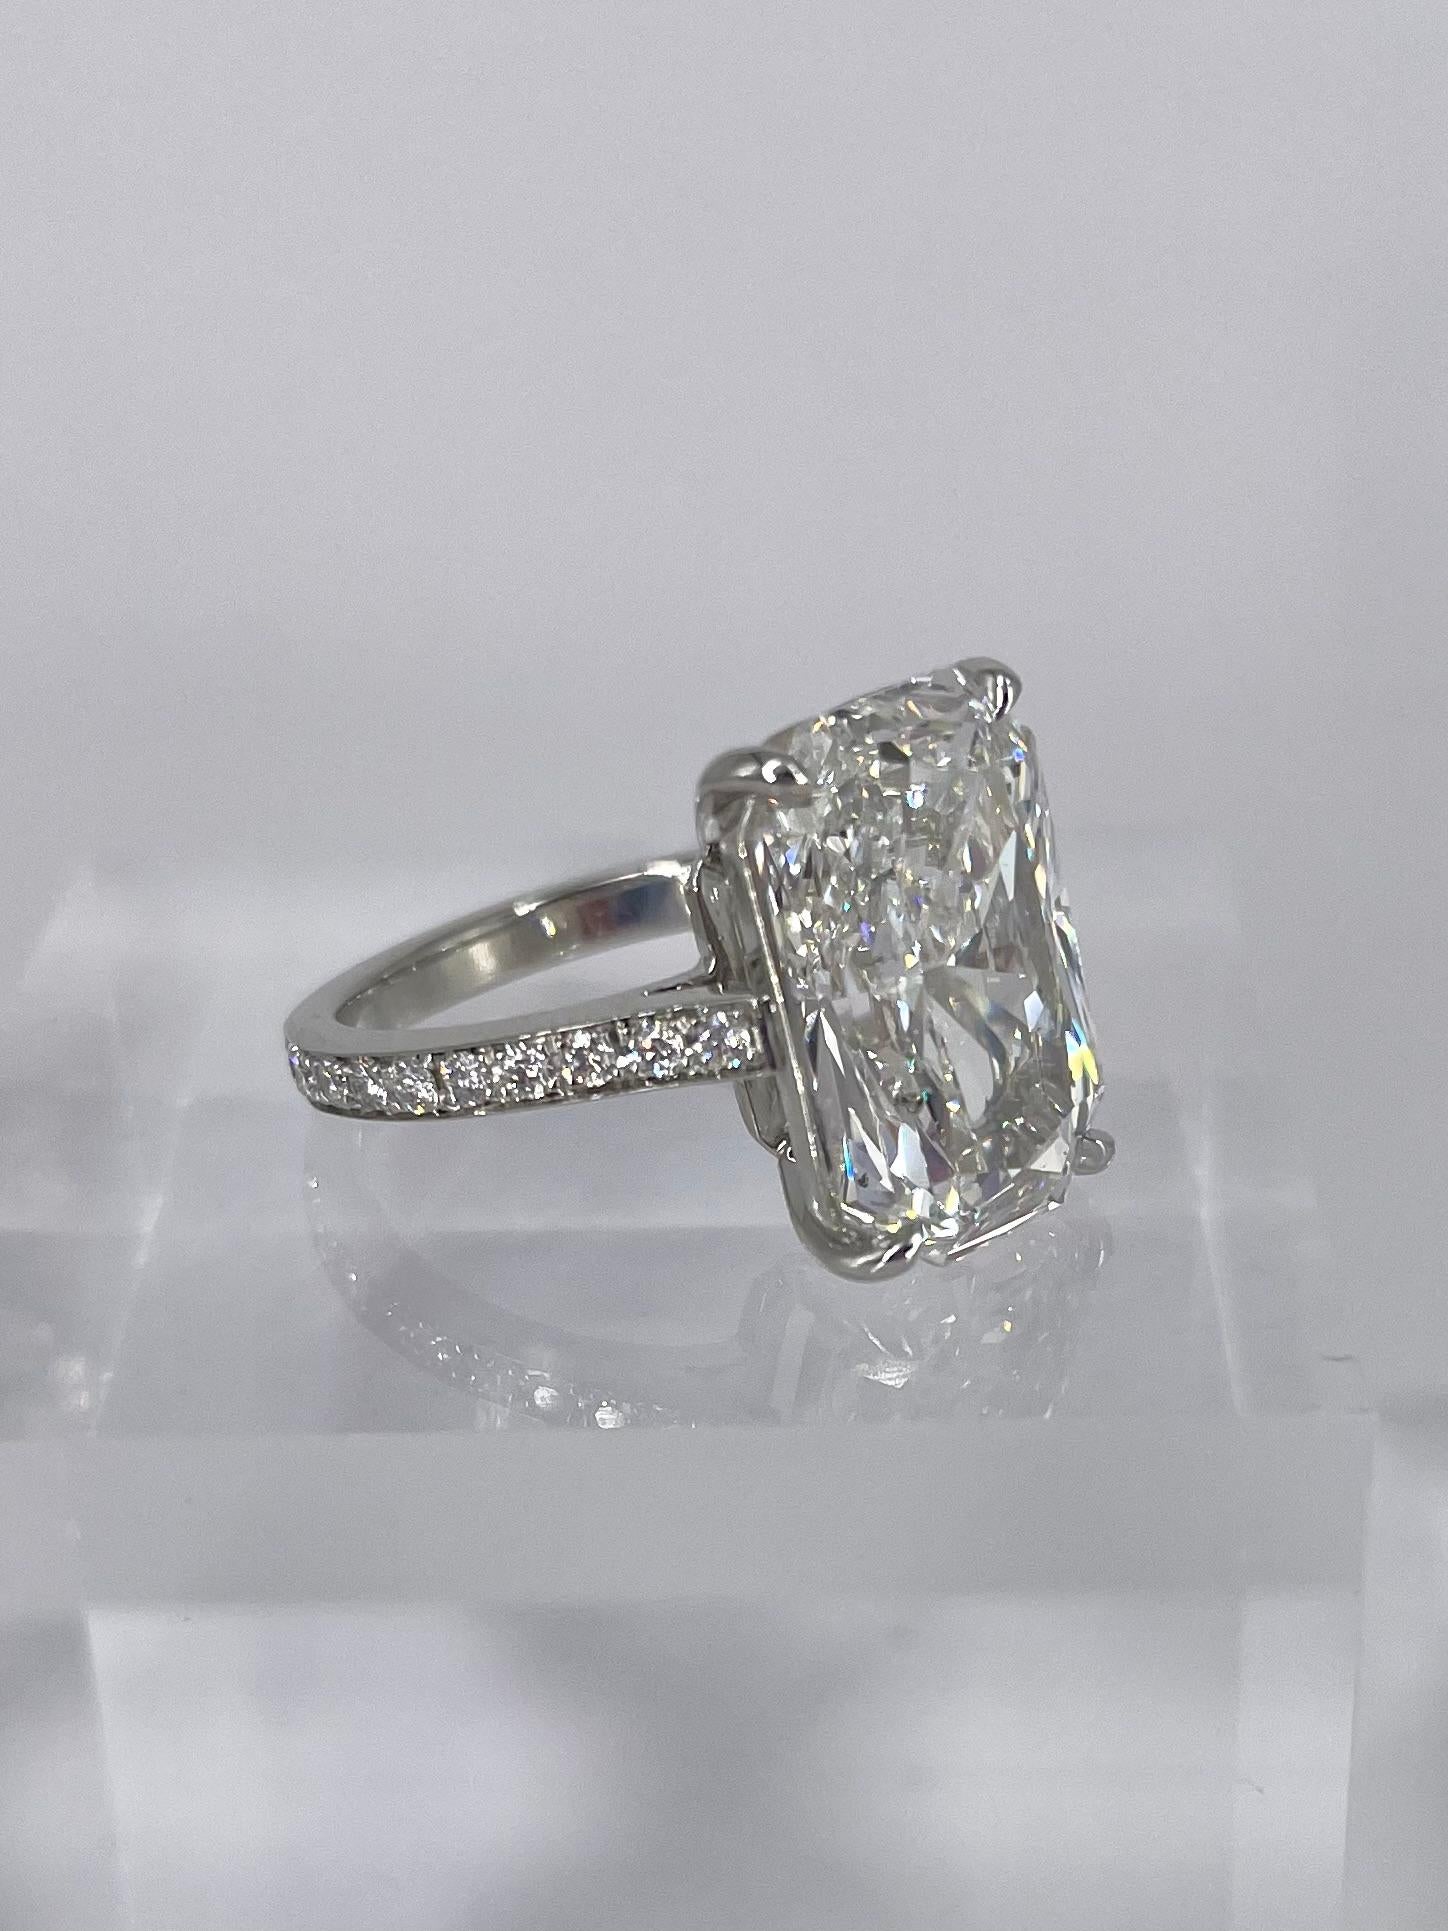 This sophisticated ring is sleek, modern and definitely makes a statement! It features a 7.80 carat radiant diamond that has an exceptionally elongated shape, which is very difficult to find. The diamond is certified by GIA to be F color and SI2